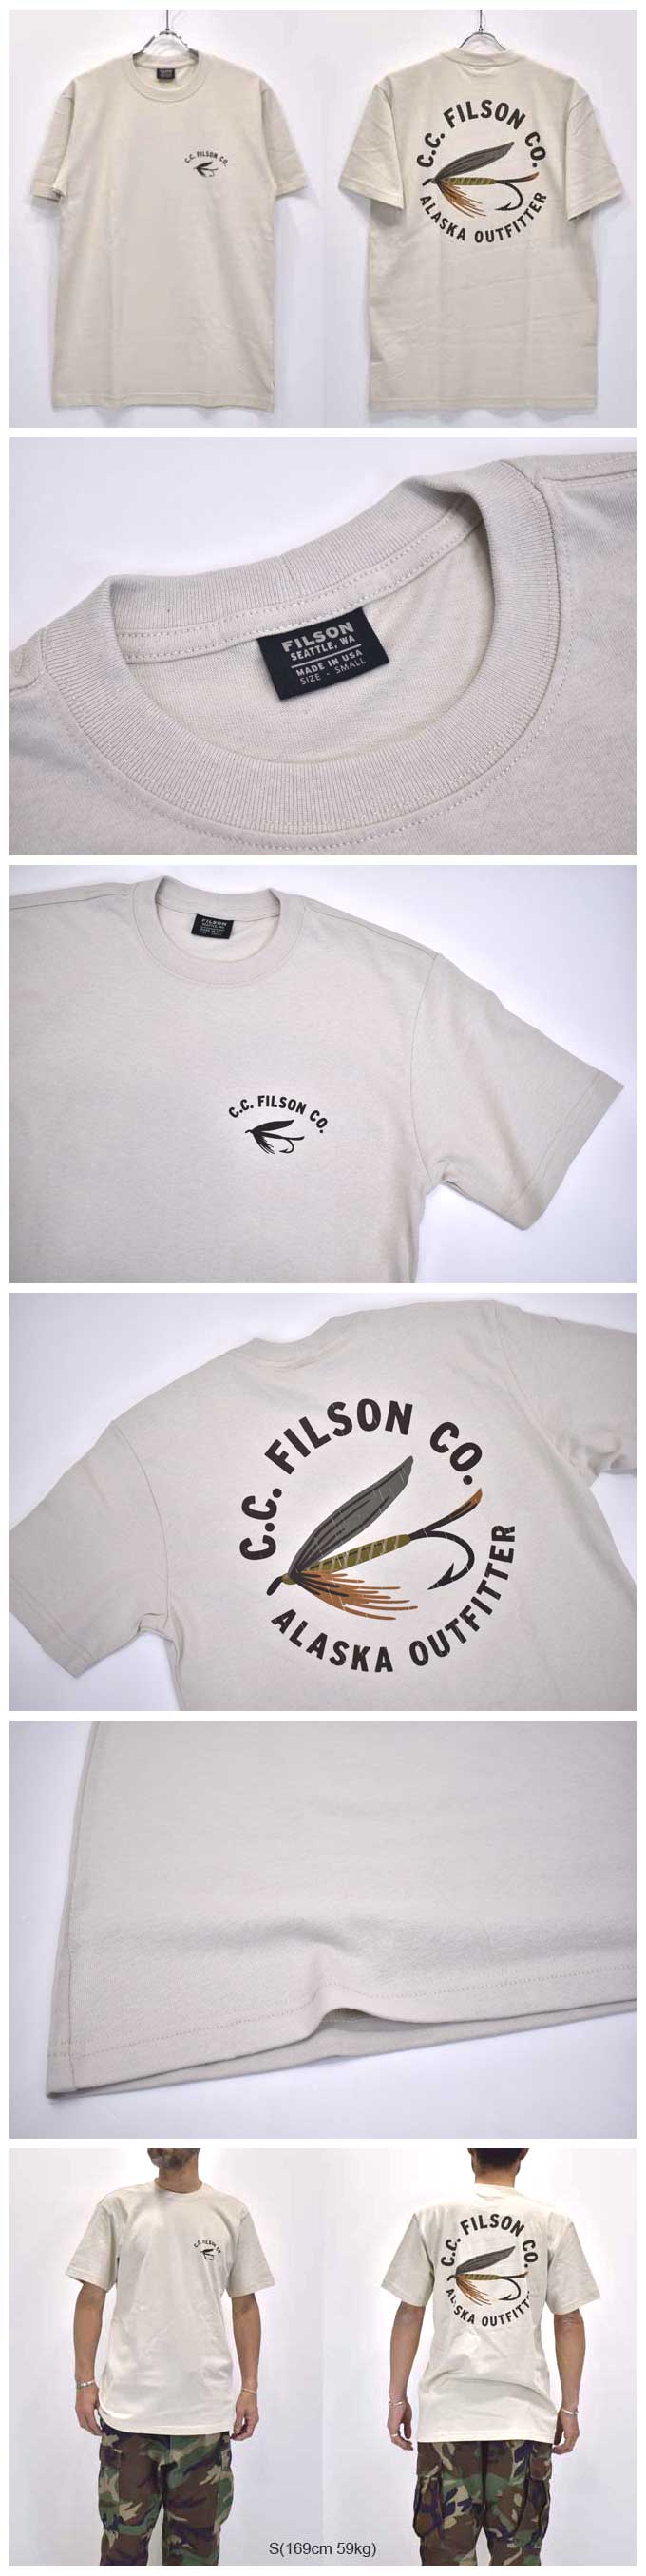 Filson S/S Outfitter Graphic T-Shirt